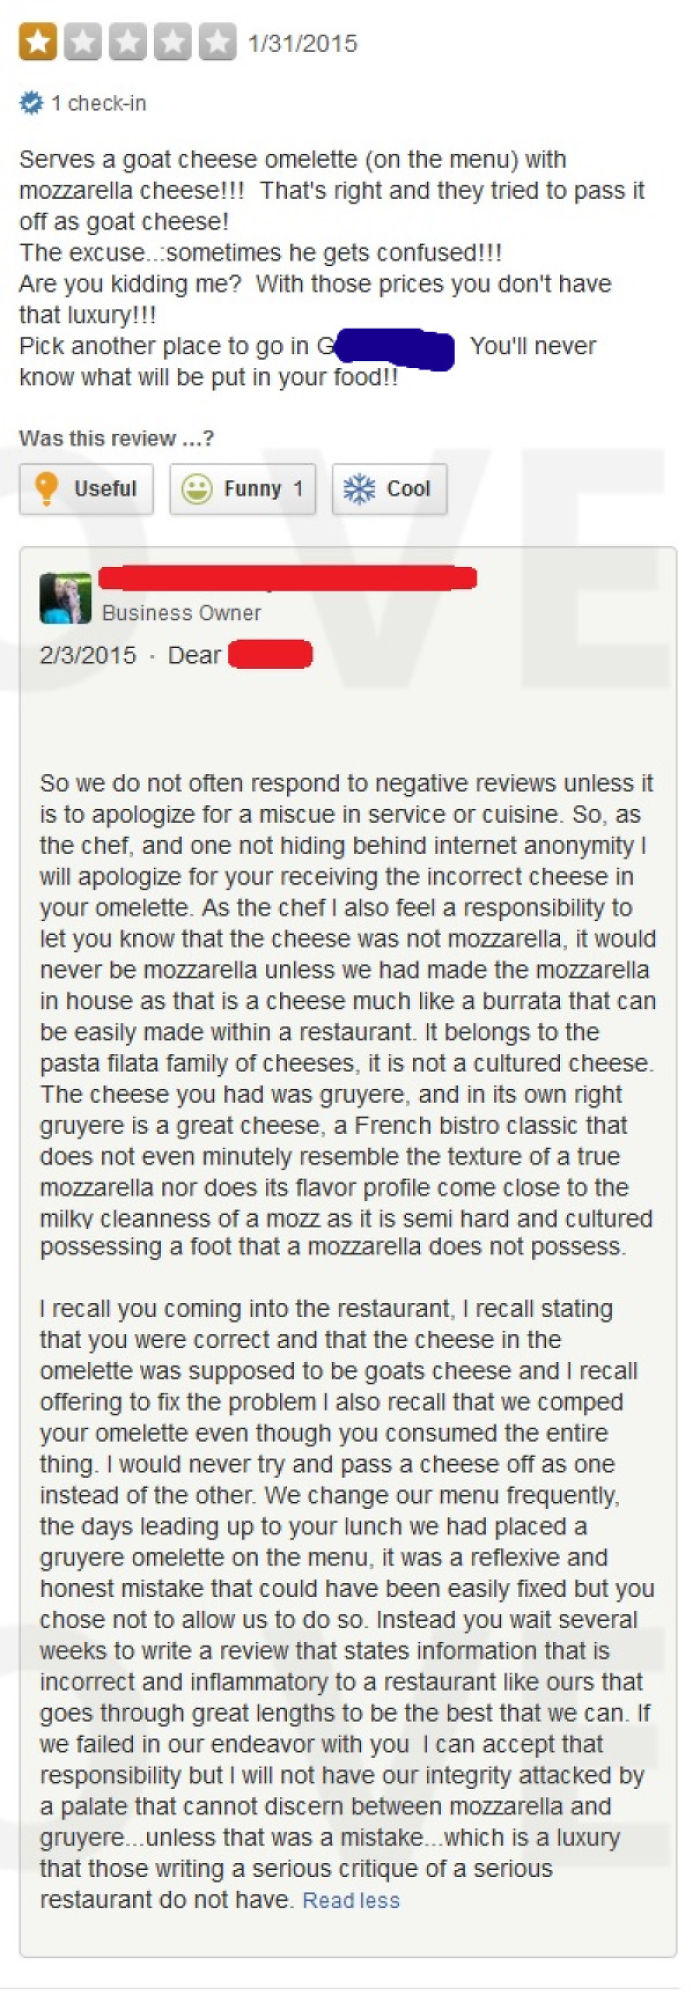 One Of My Favorite Restaurants Got A Bad Review And The Owner/Chef Called Them Out...